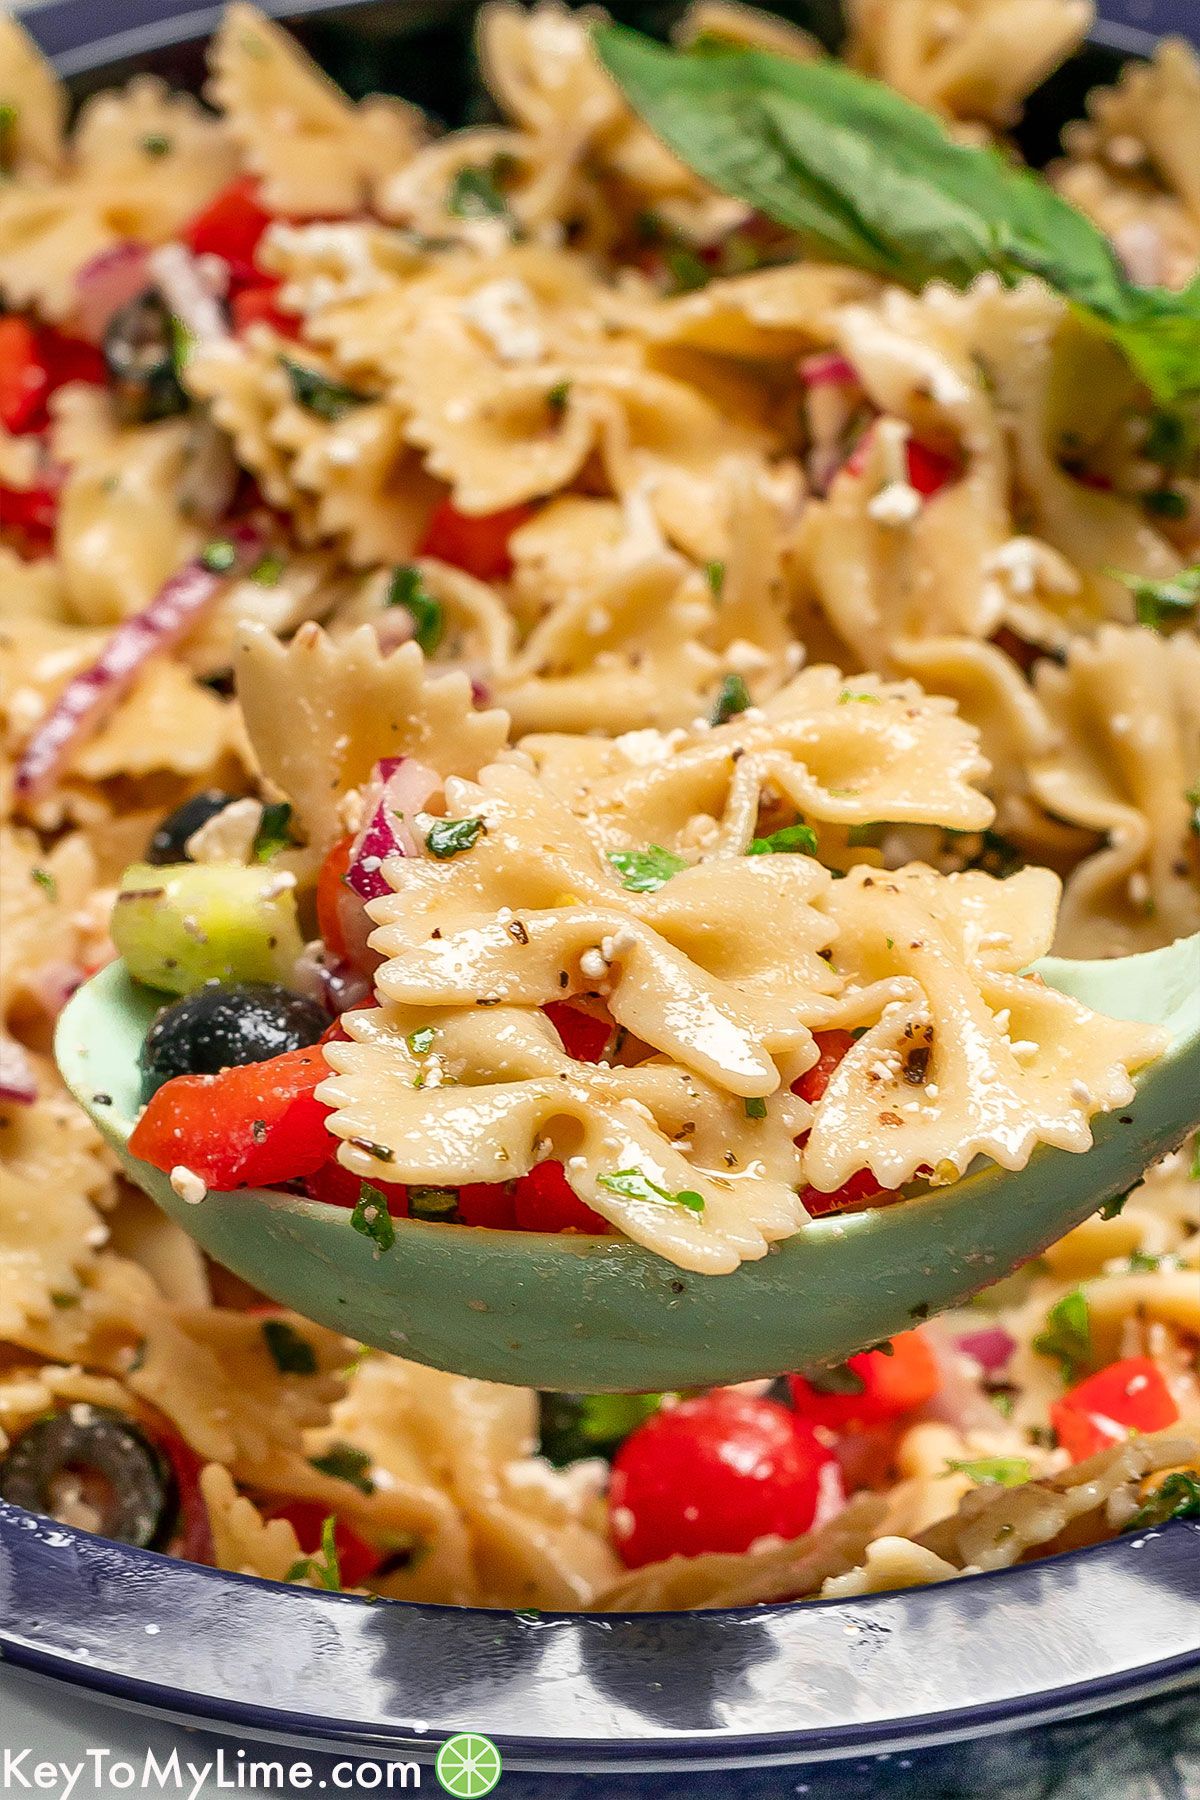 A close up image showing the texture of the pasta salad on a serving spoon.